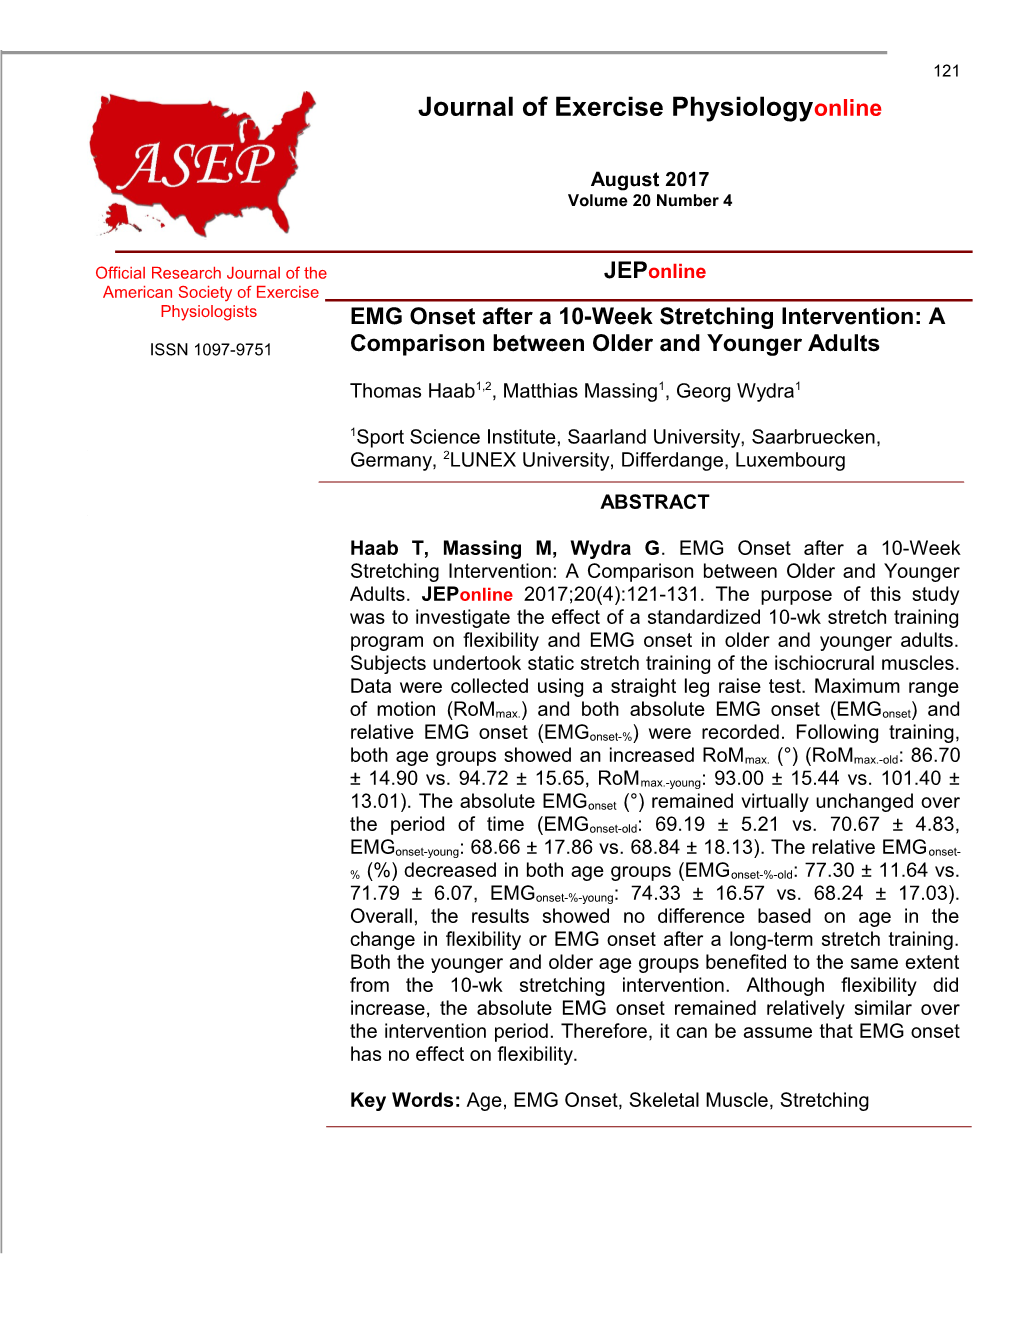 EMG Onset After a 10-Week Stretching Intervention: Acomparison Between Older and Younger